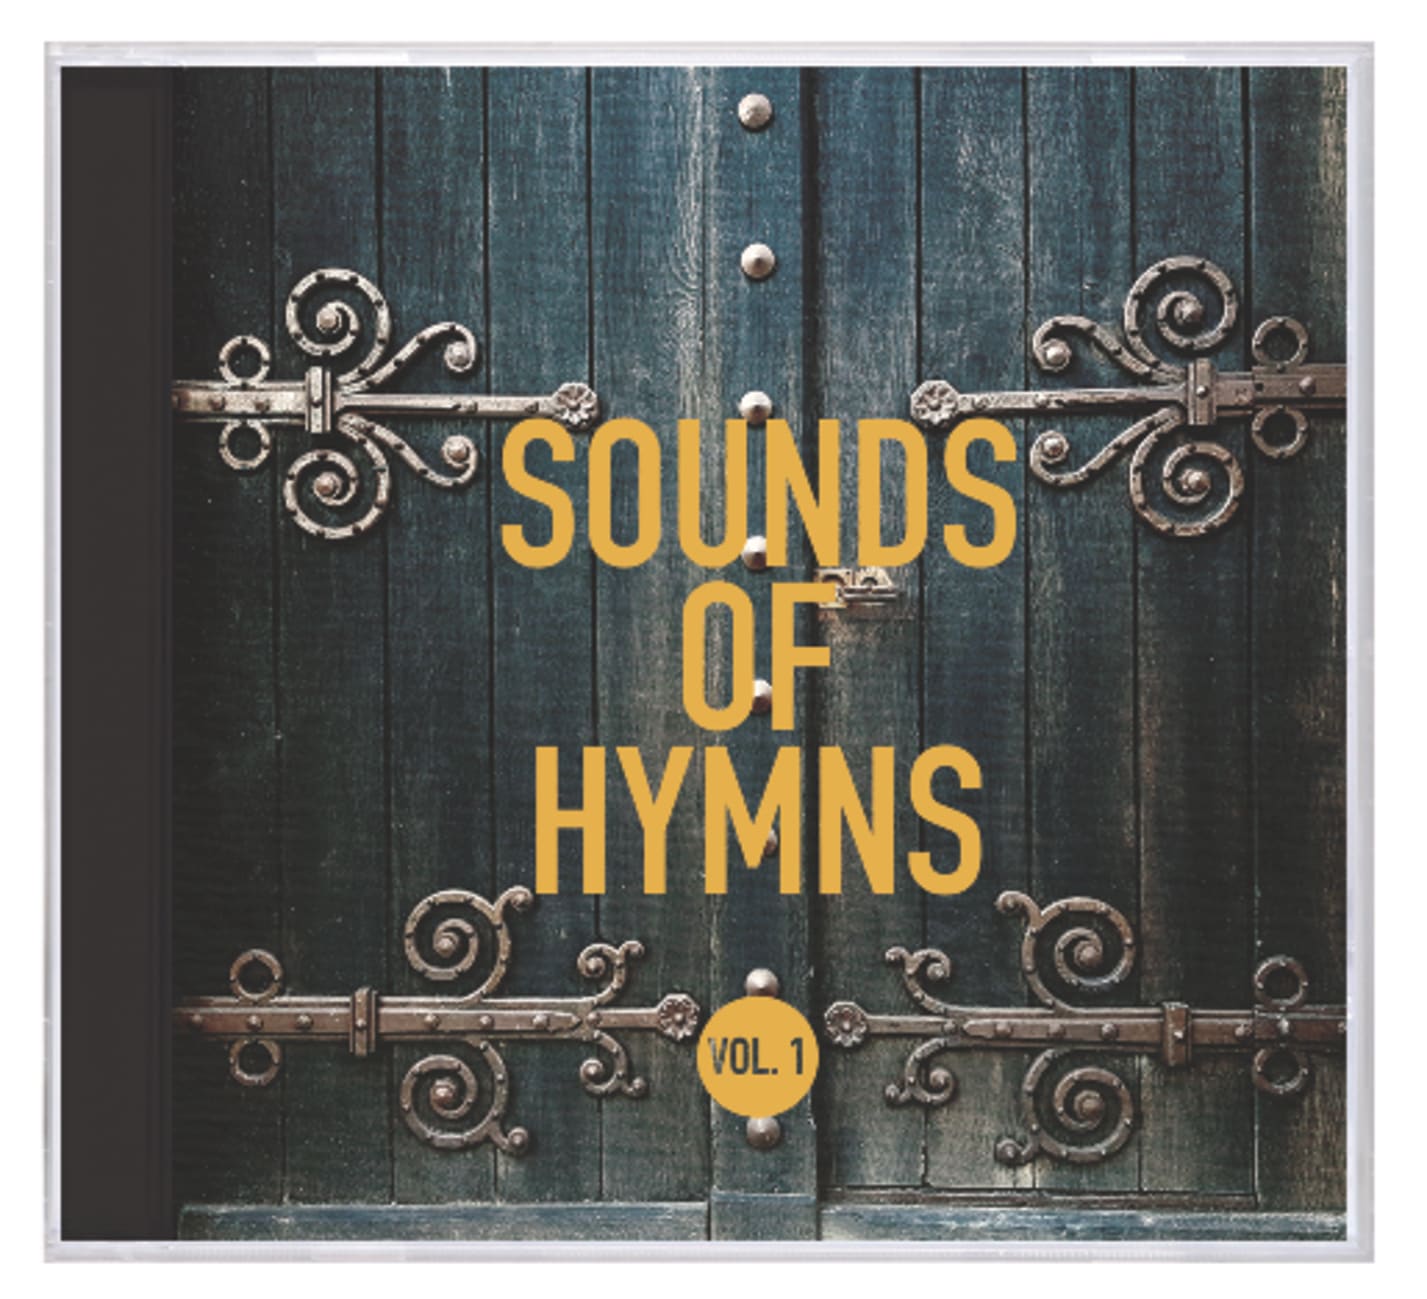 Sounds of Hymns Volume 1 Compact Disk